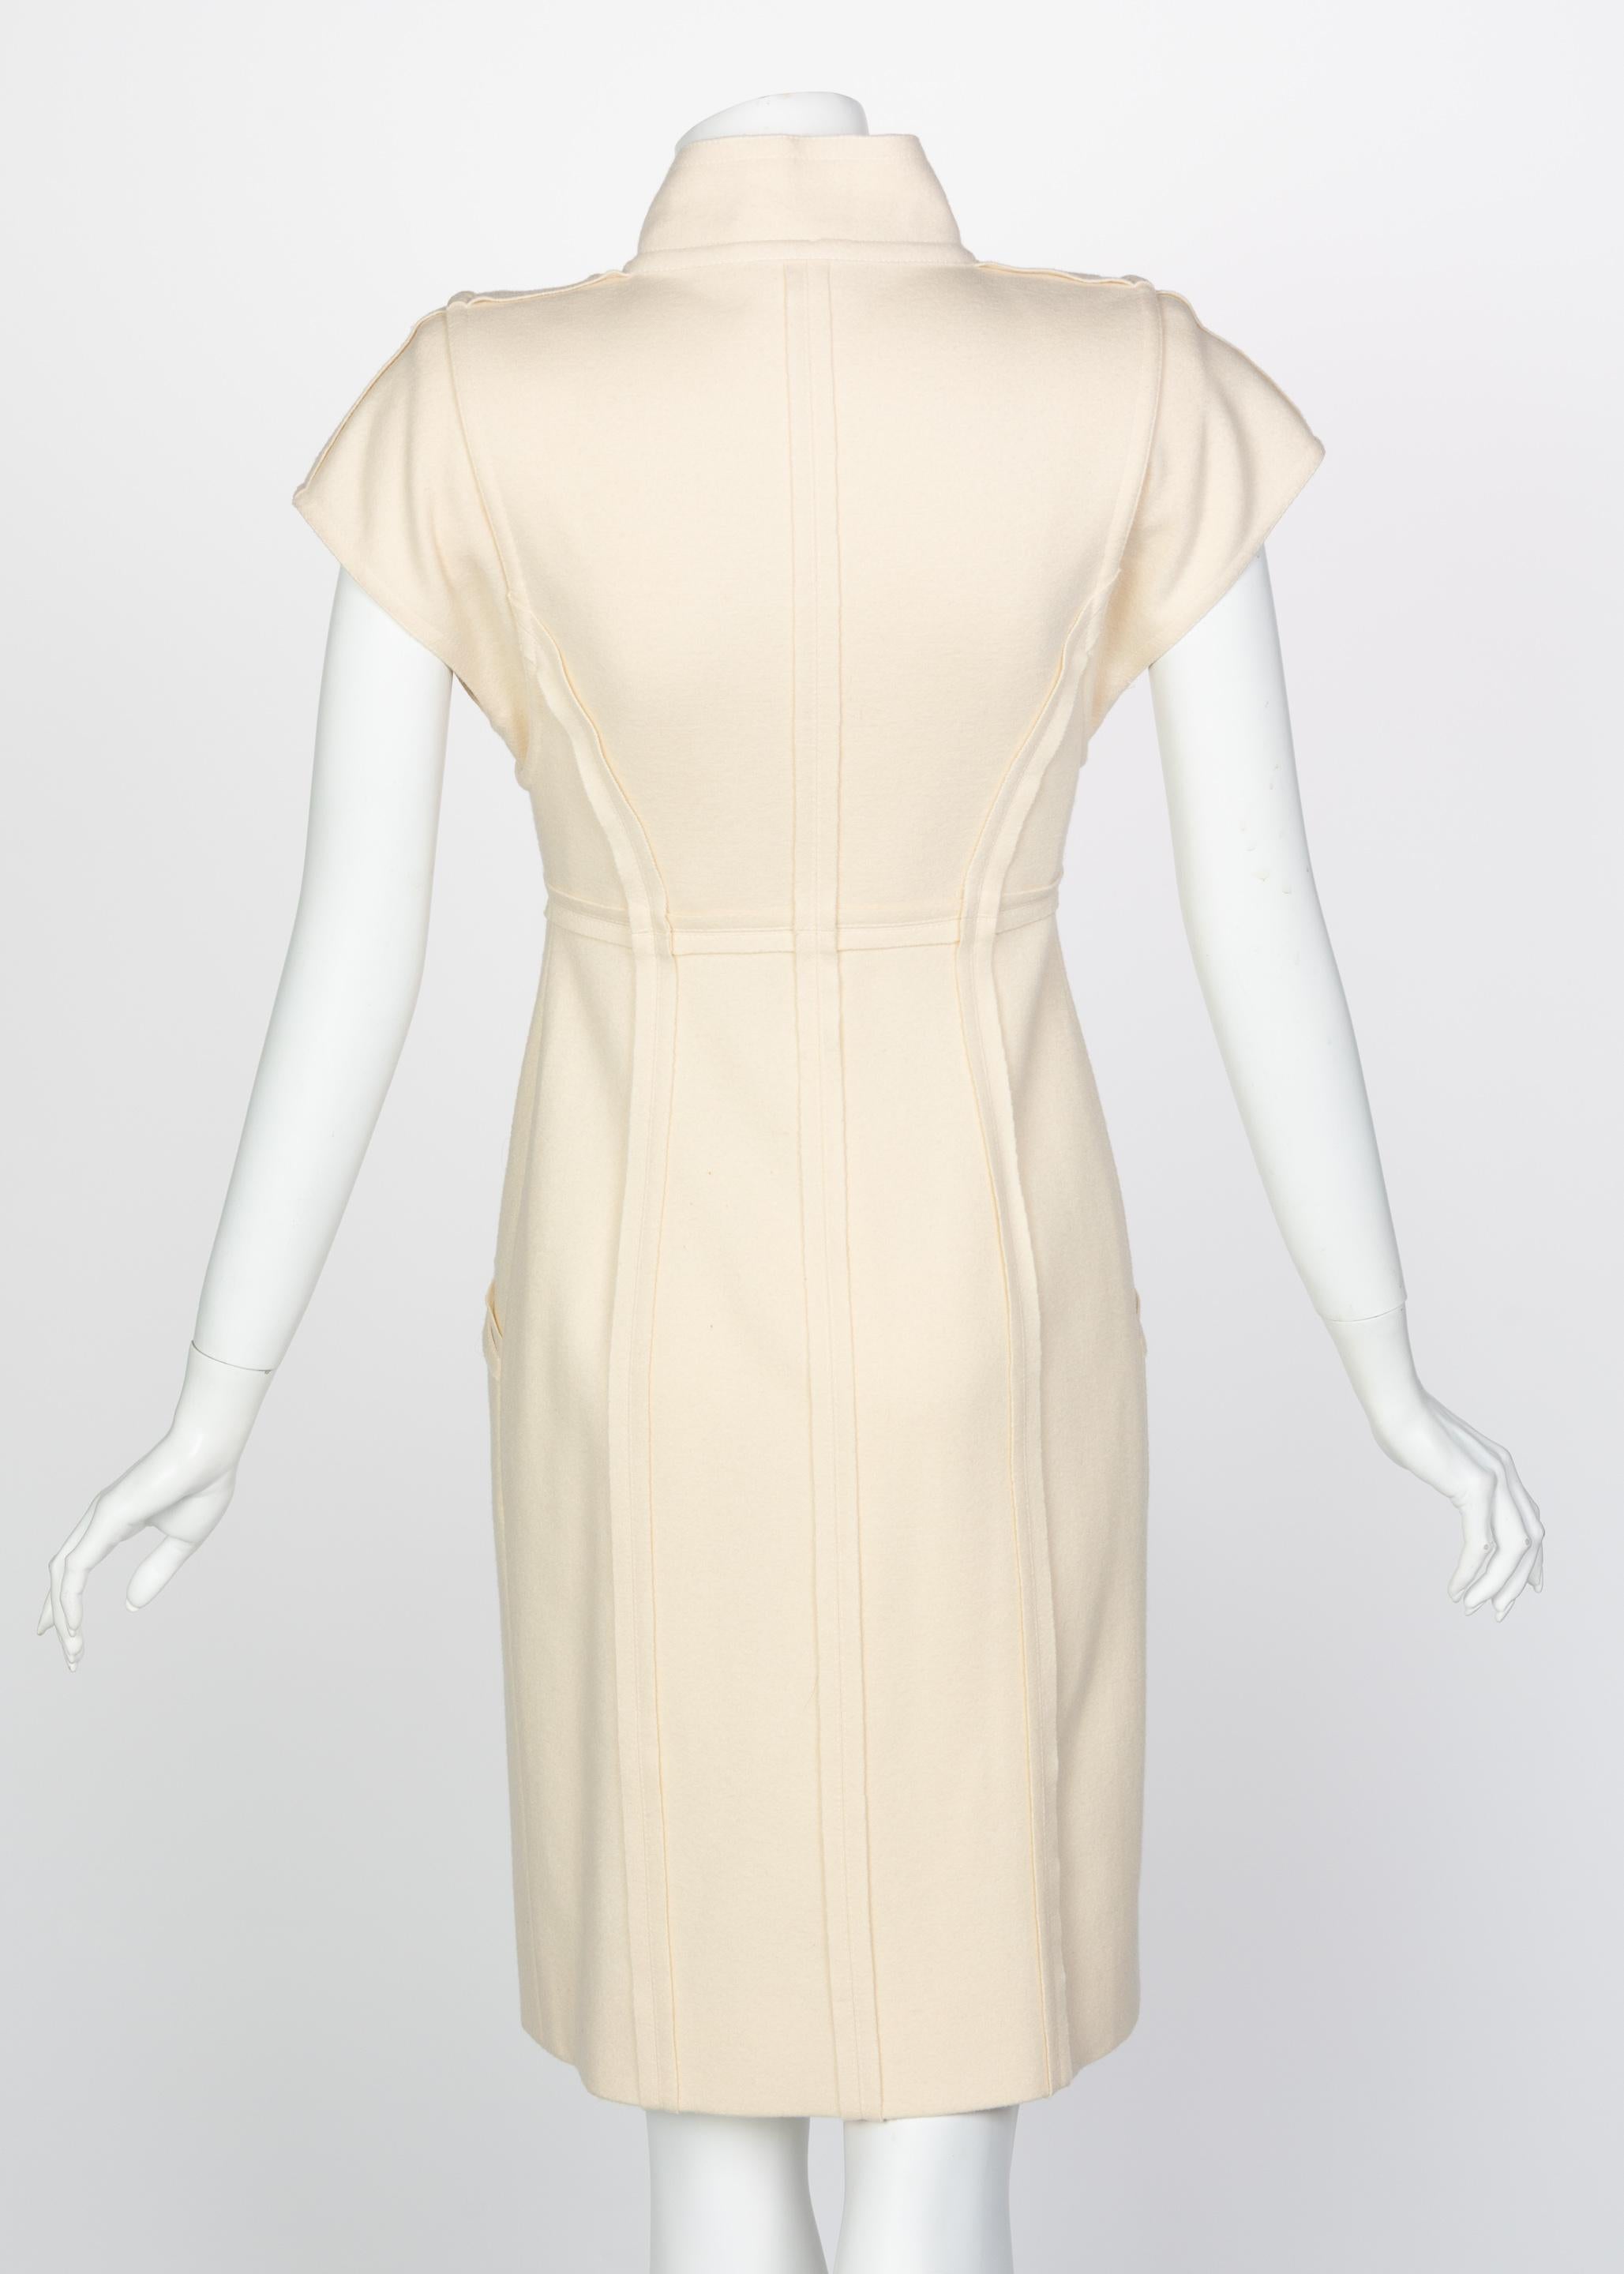 Fendi Ivory Sculpted Wool Short Sleeve Dress, 2008 For Sale at 1stDibs ...